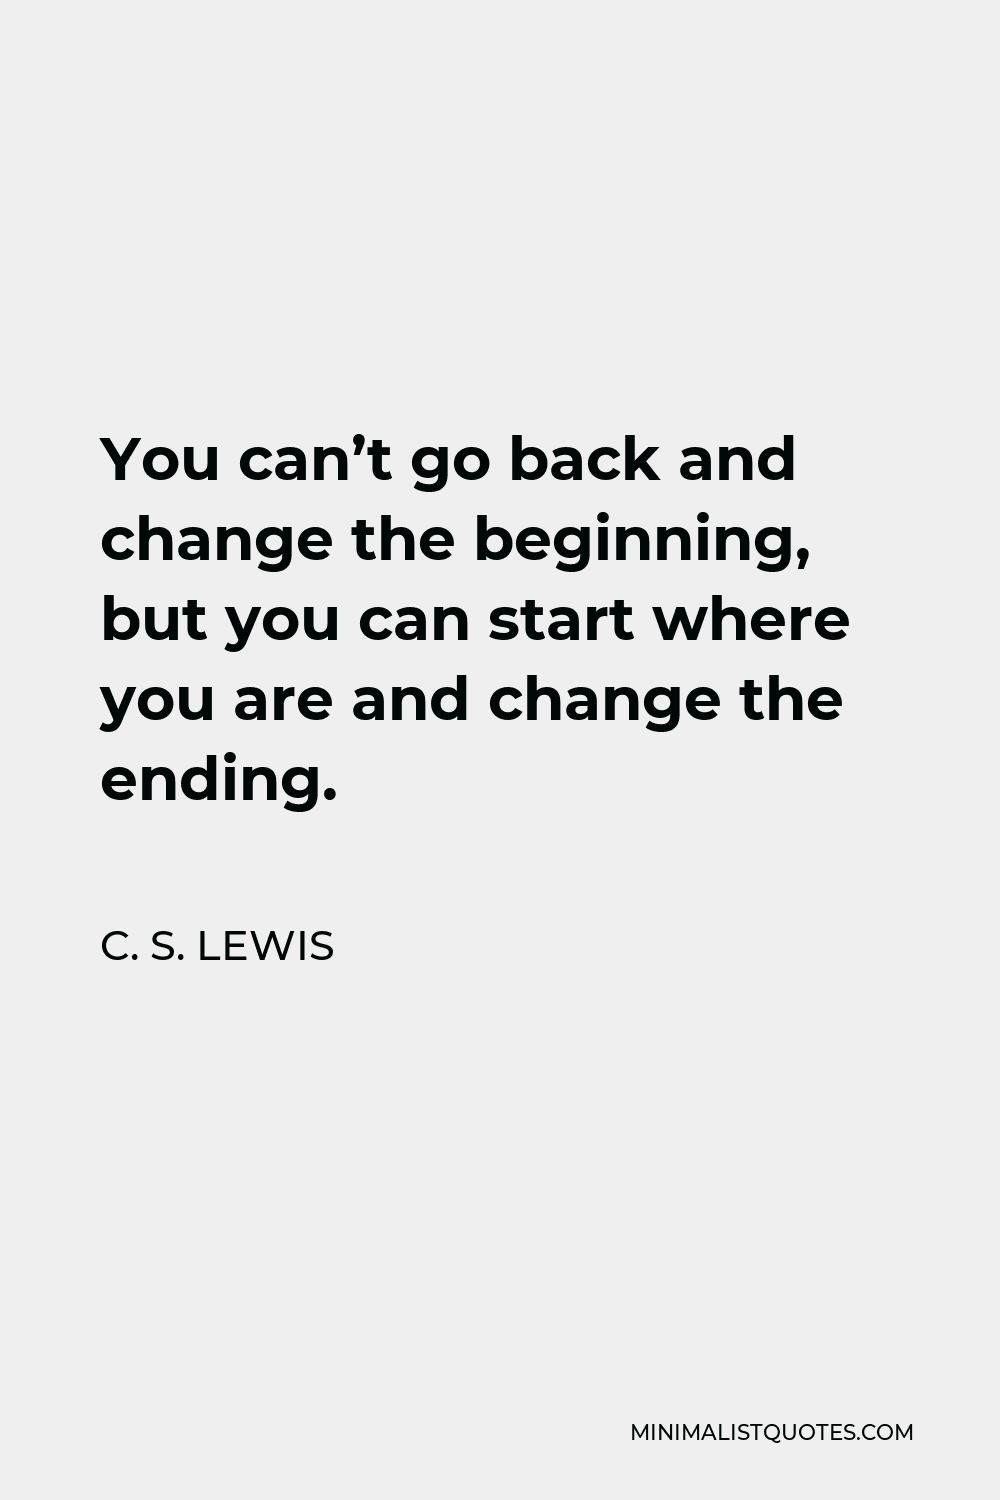 C. S. Lewis Quote - You can’t go back and change the beginning, but you can start where you are and change the ending.